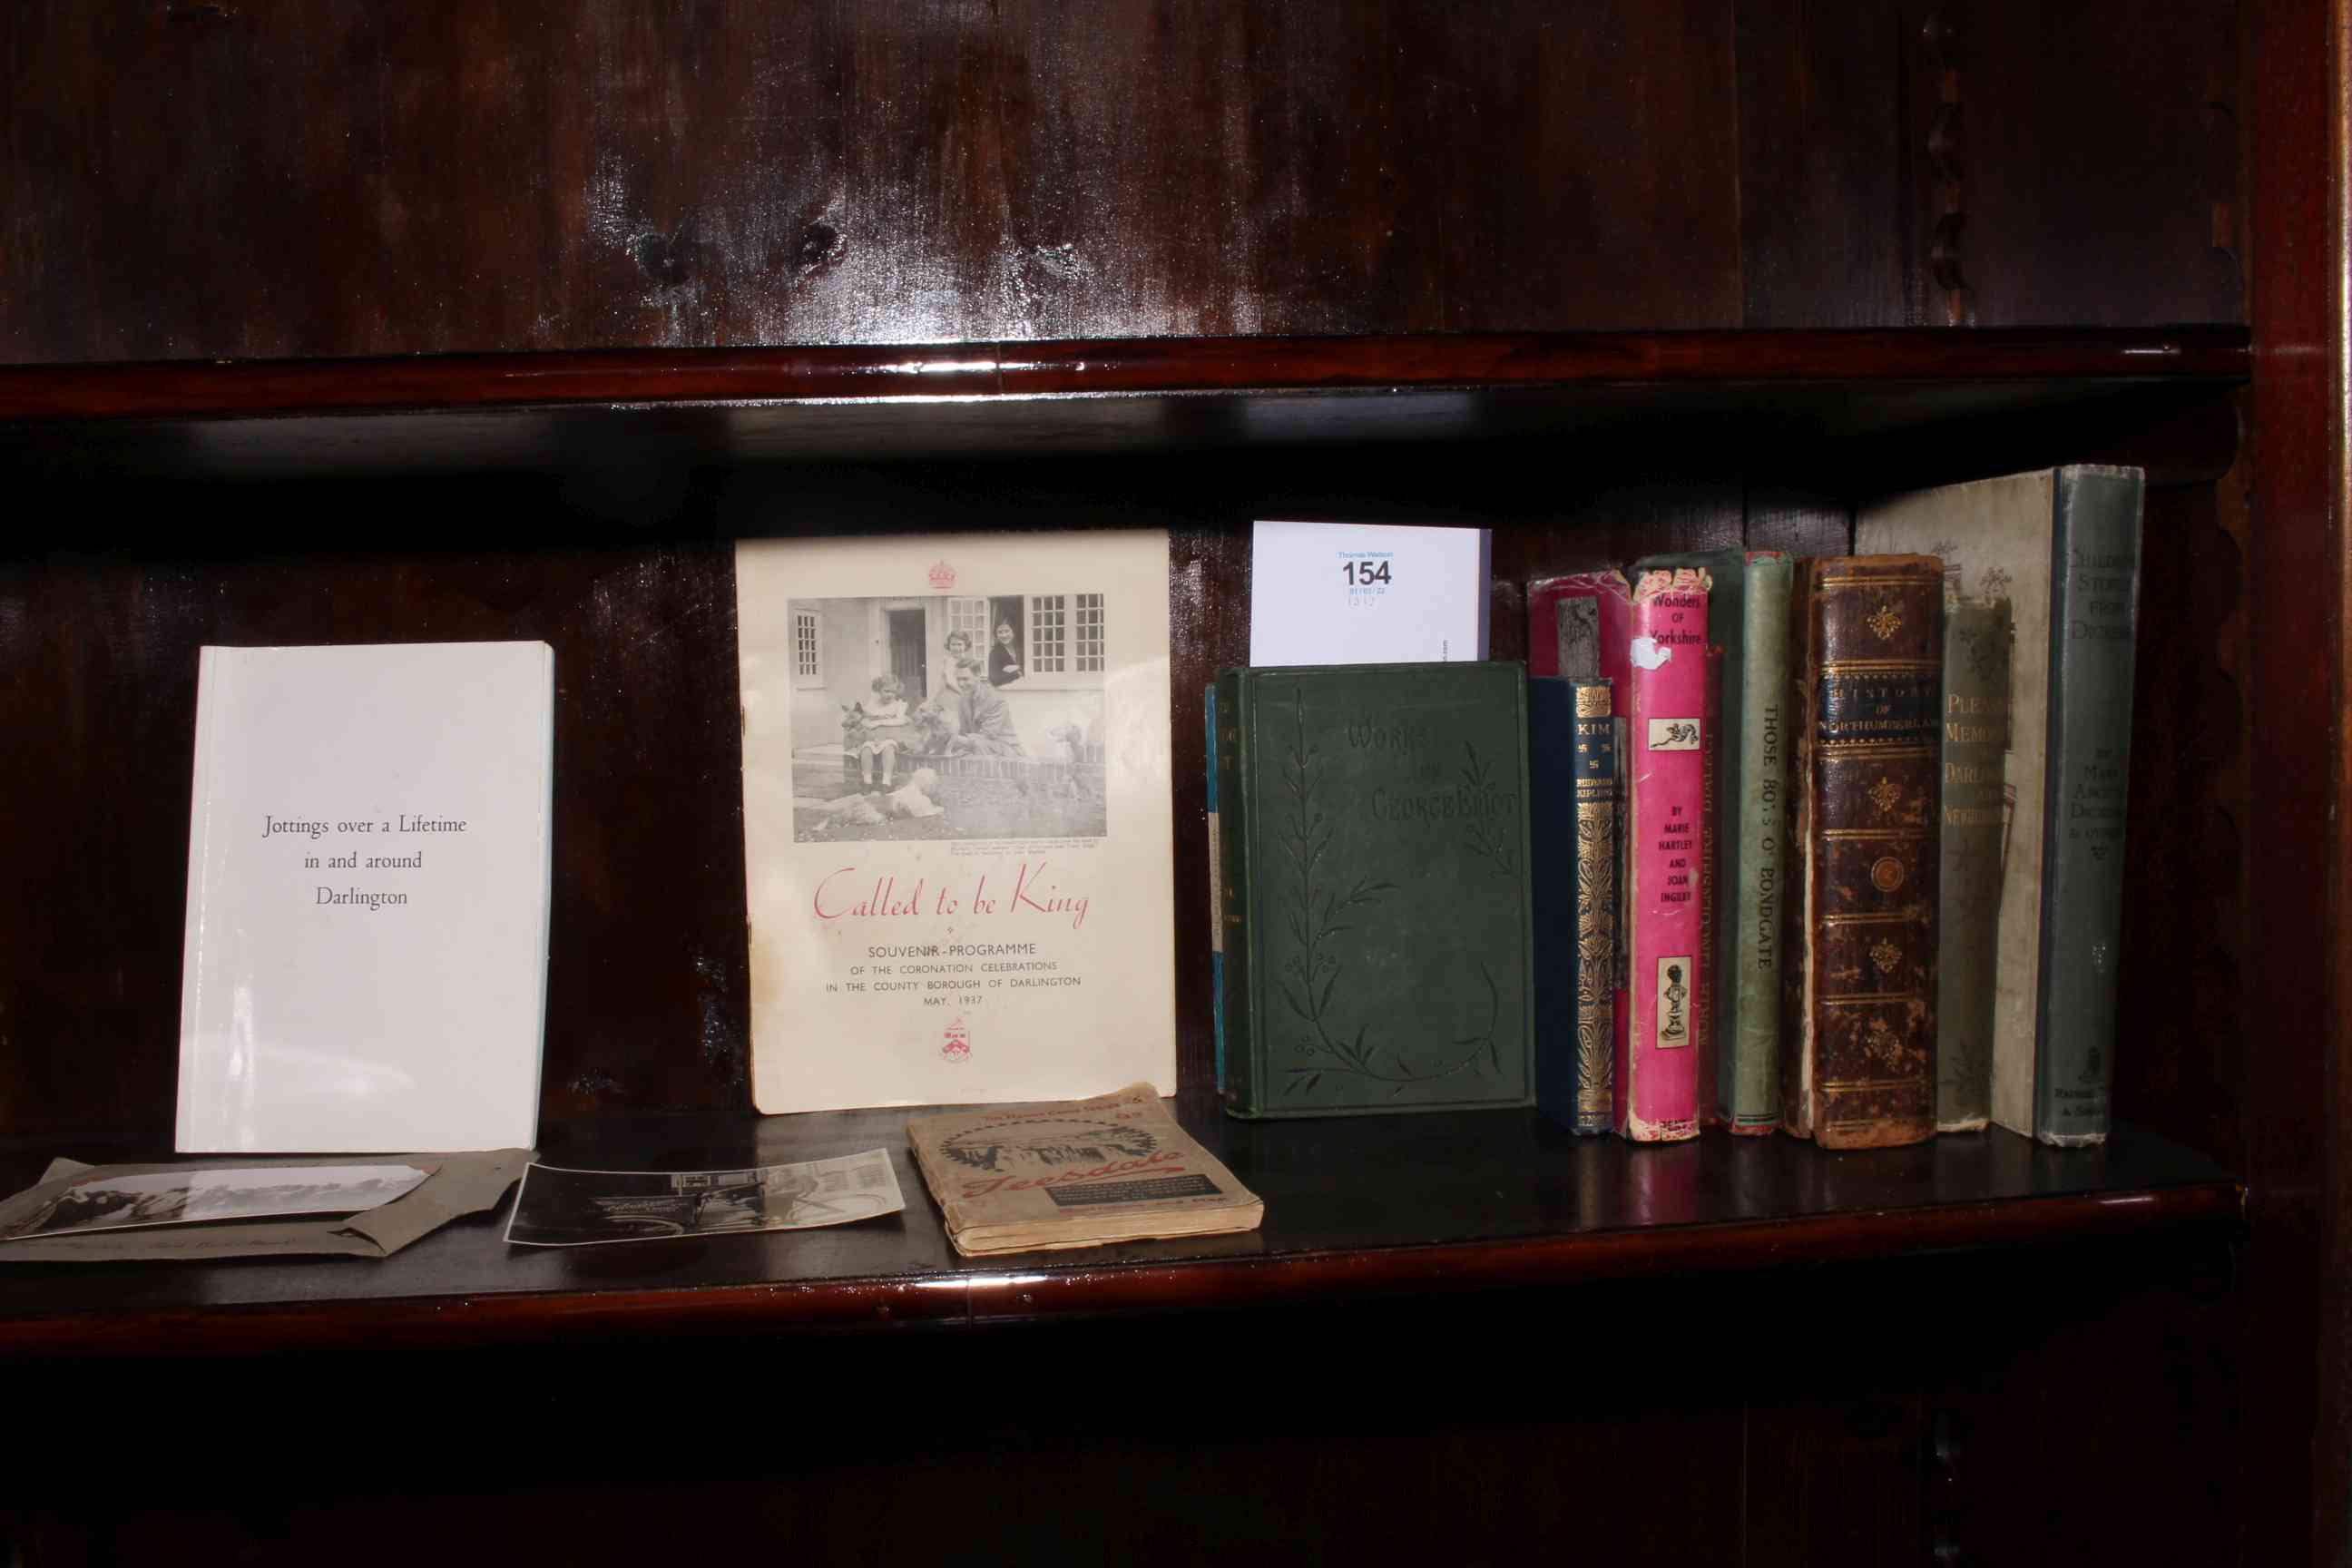 Collection of books including Darlington interest.